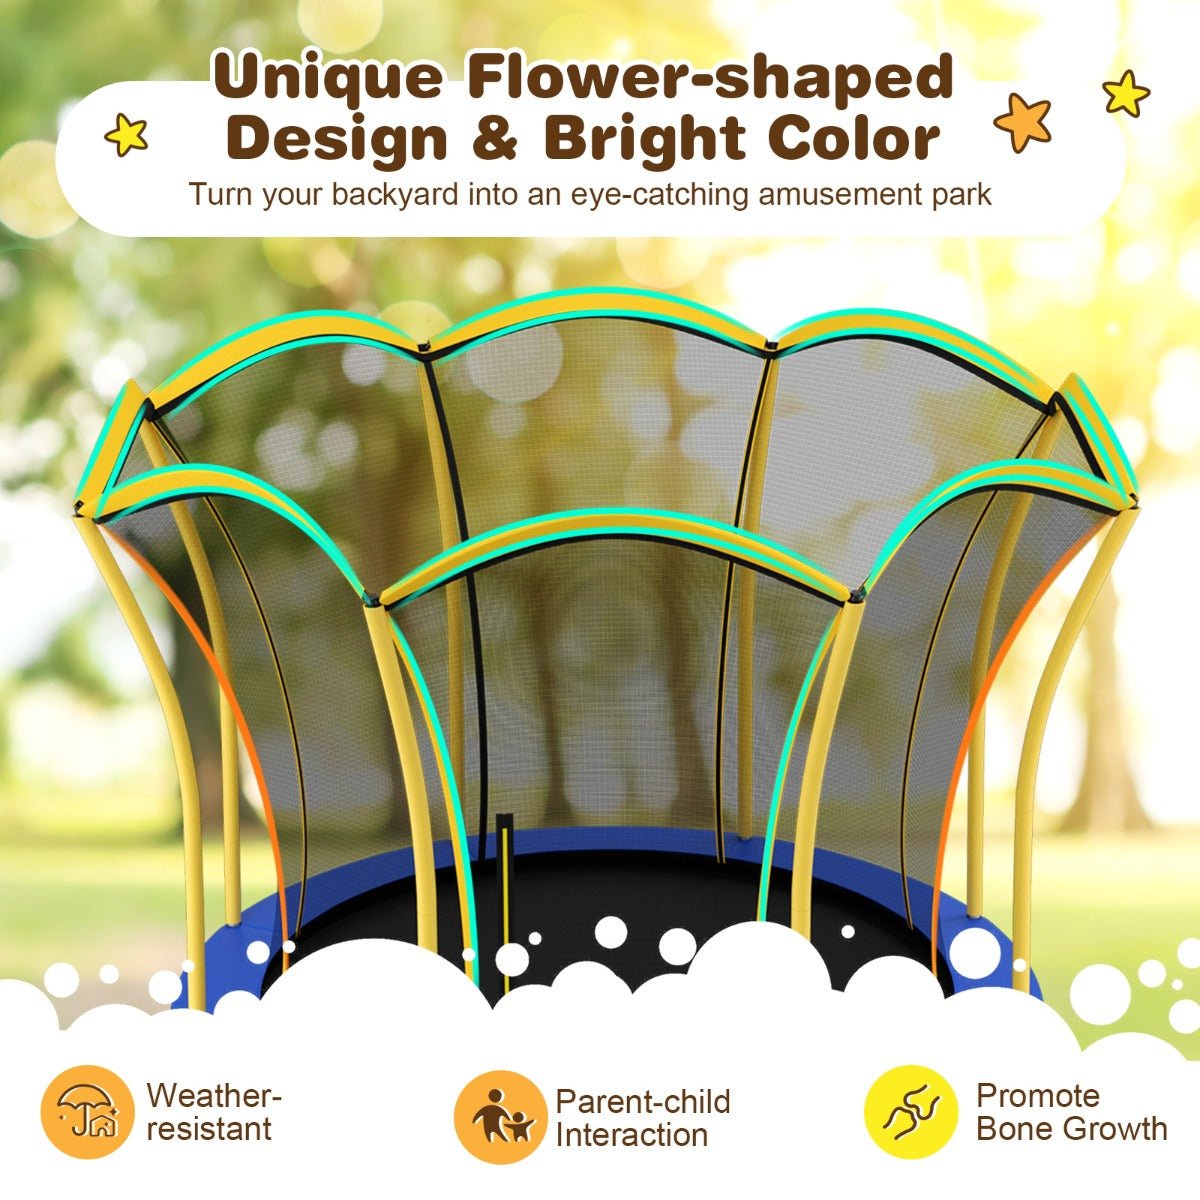 Get Your 8FT Flower Trampoline for Endless Family Fun